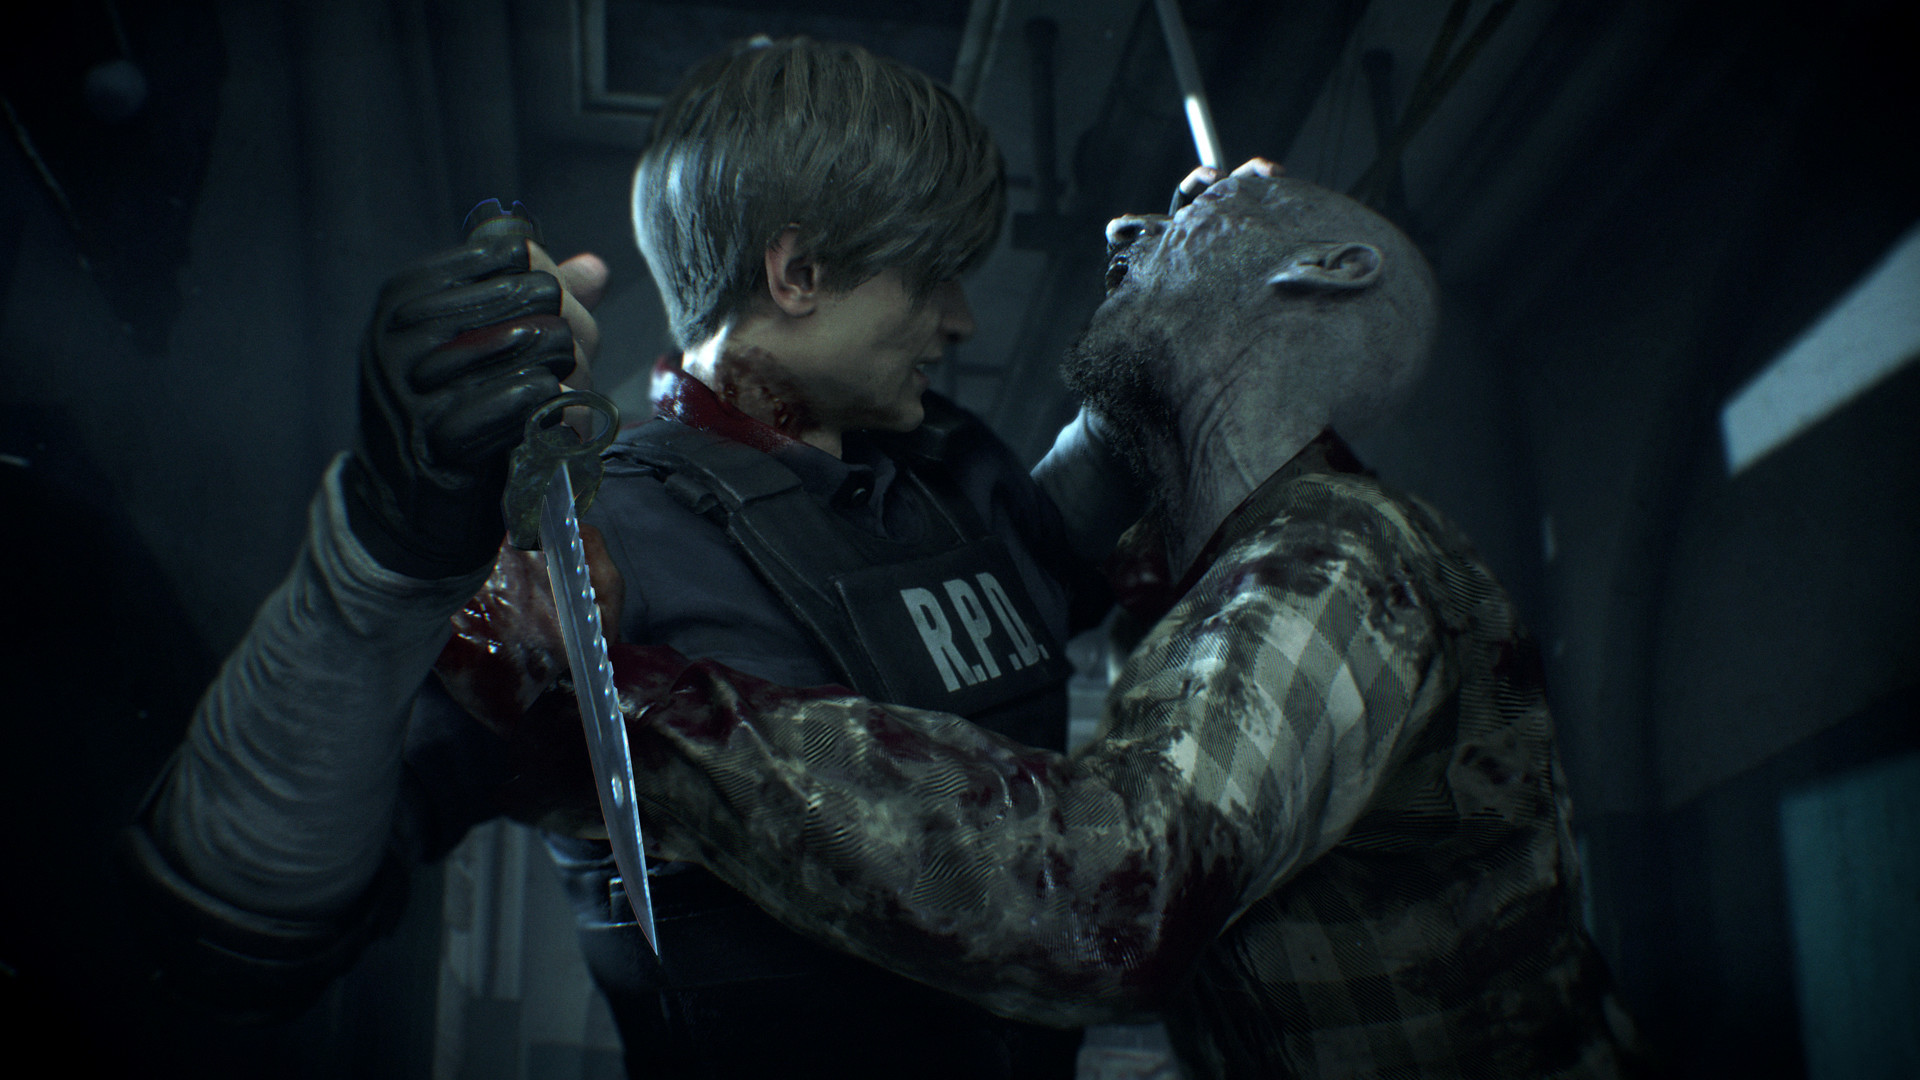 Resident Evil 2 Video Games Claire Redfield Leon Kennedy Capcom Racoon City Resident Evil 1920x1080